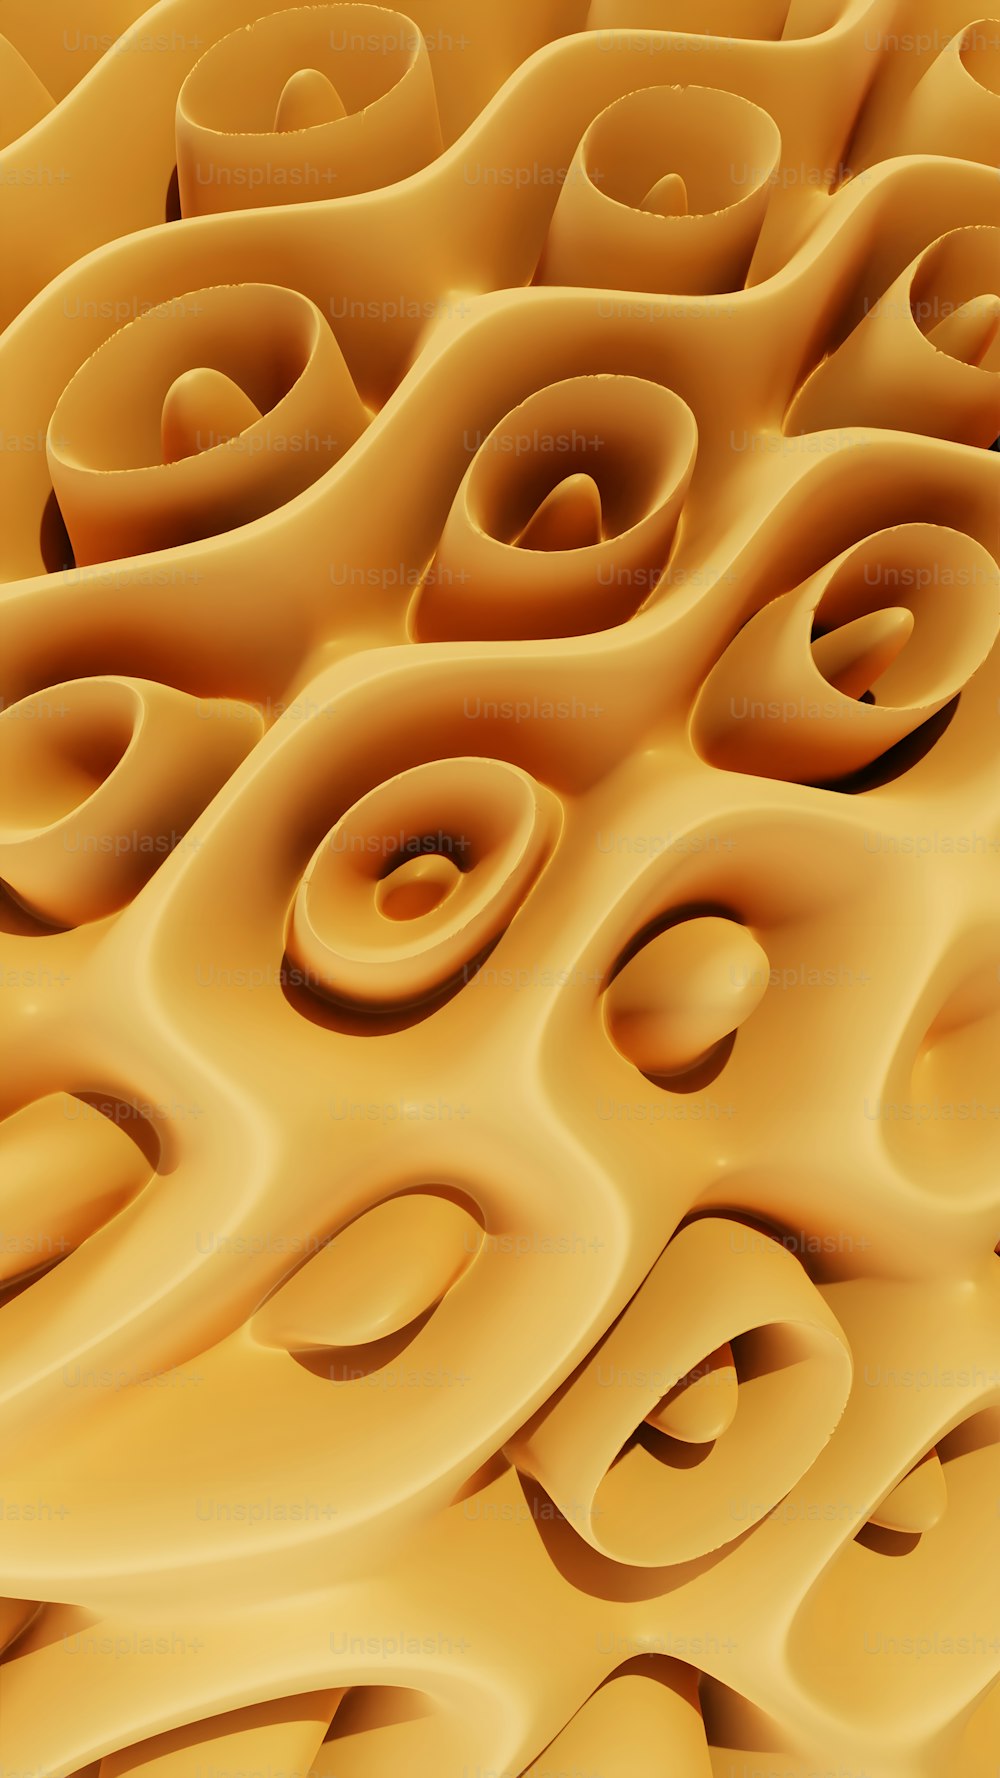 a computer generated image of a wavy pattern